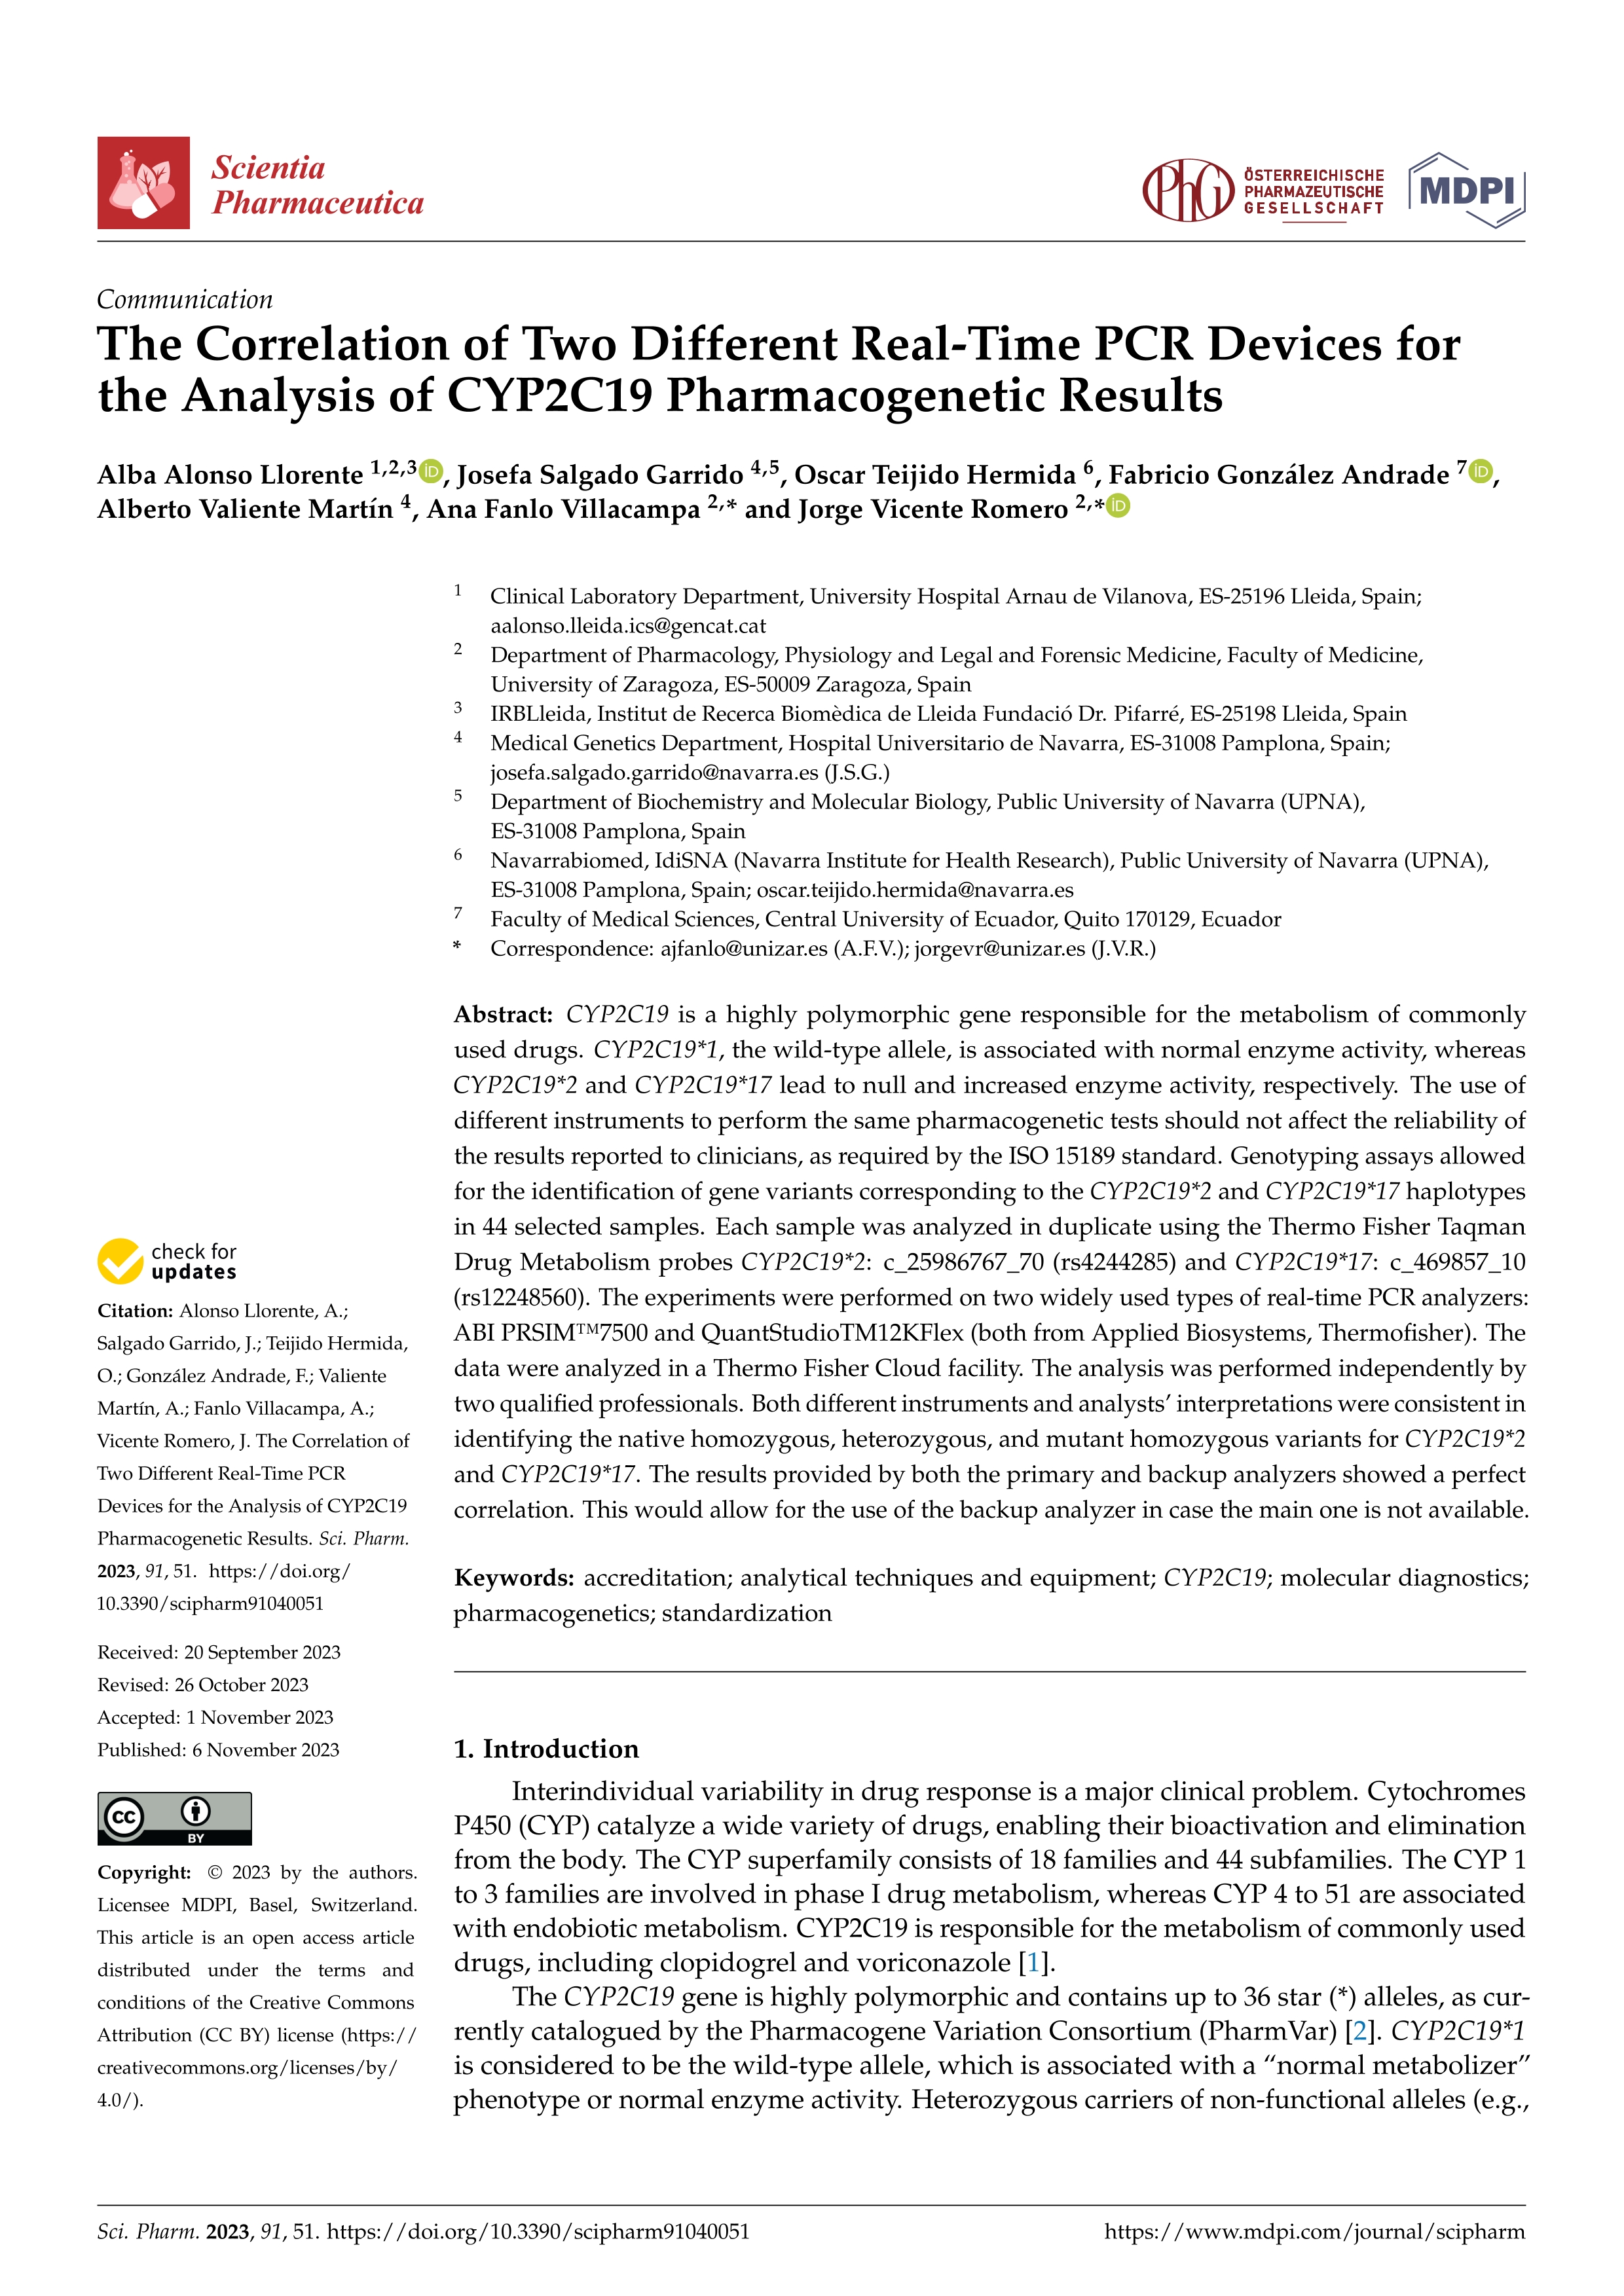 The correlation of two different real-time PCR devices for the analysis of CYP2C19 pharmacogenetic results